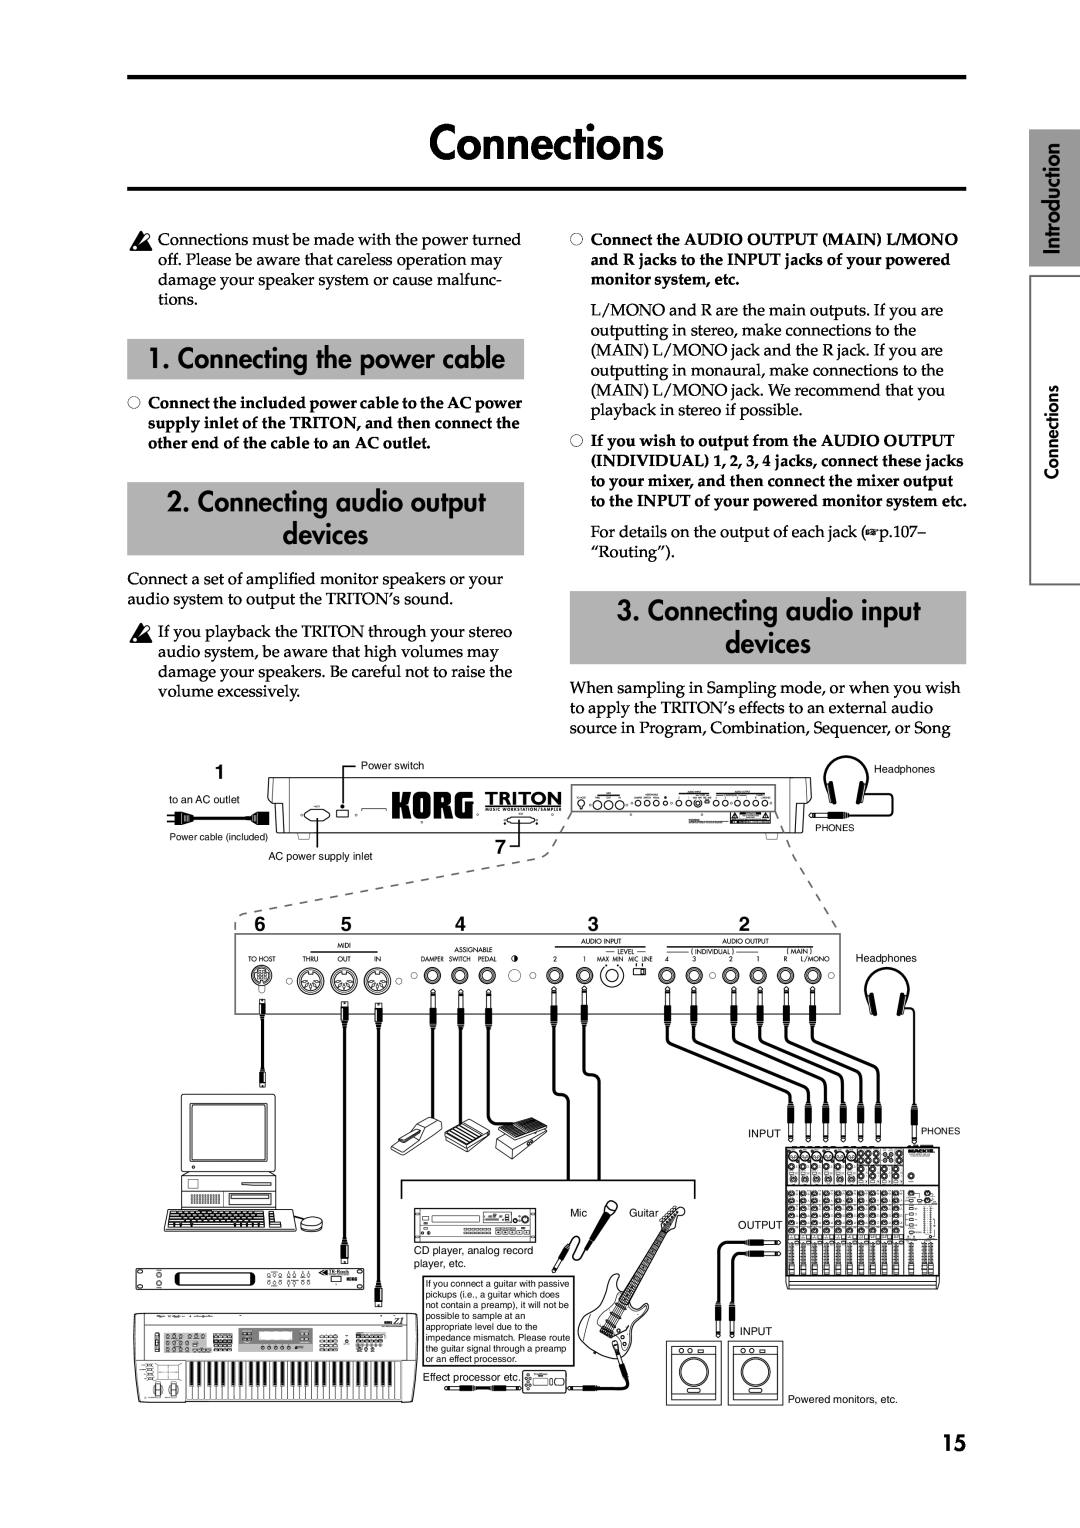 Korg Speaker System owner manual Connections, Connecting the power cable, Connecting audio output devices, Introduction 